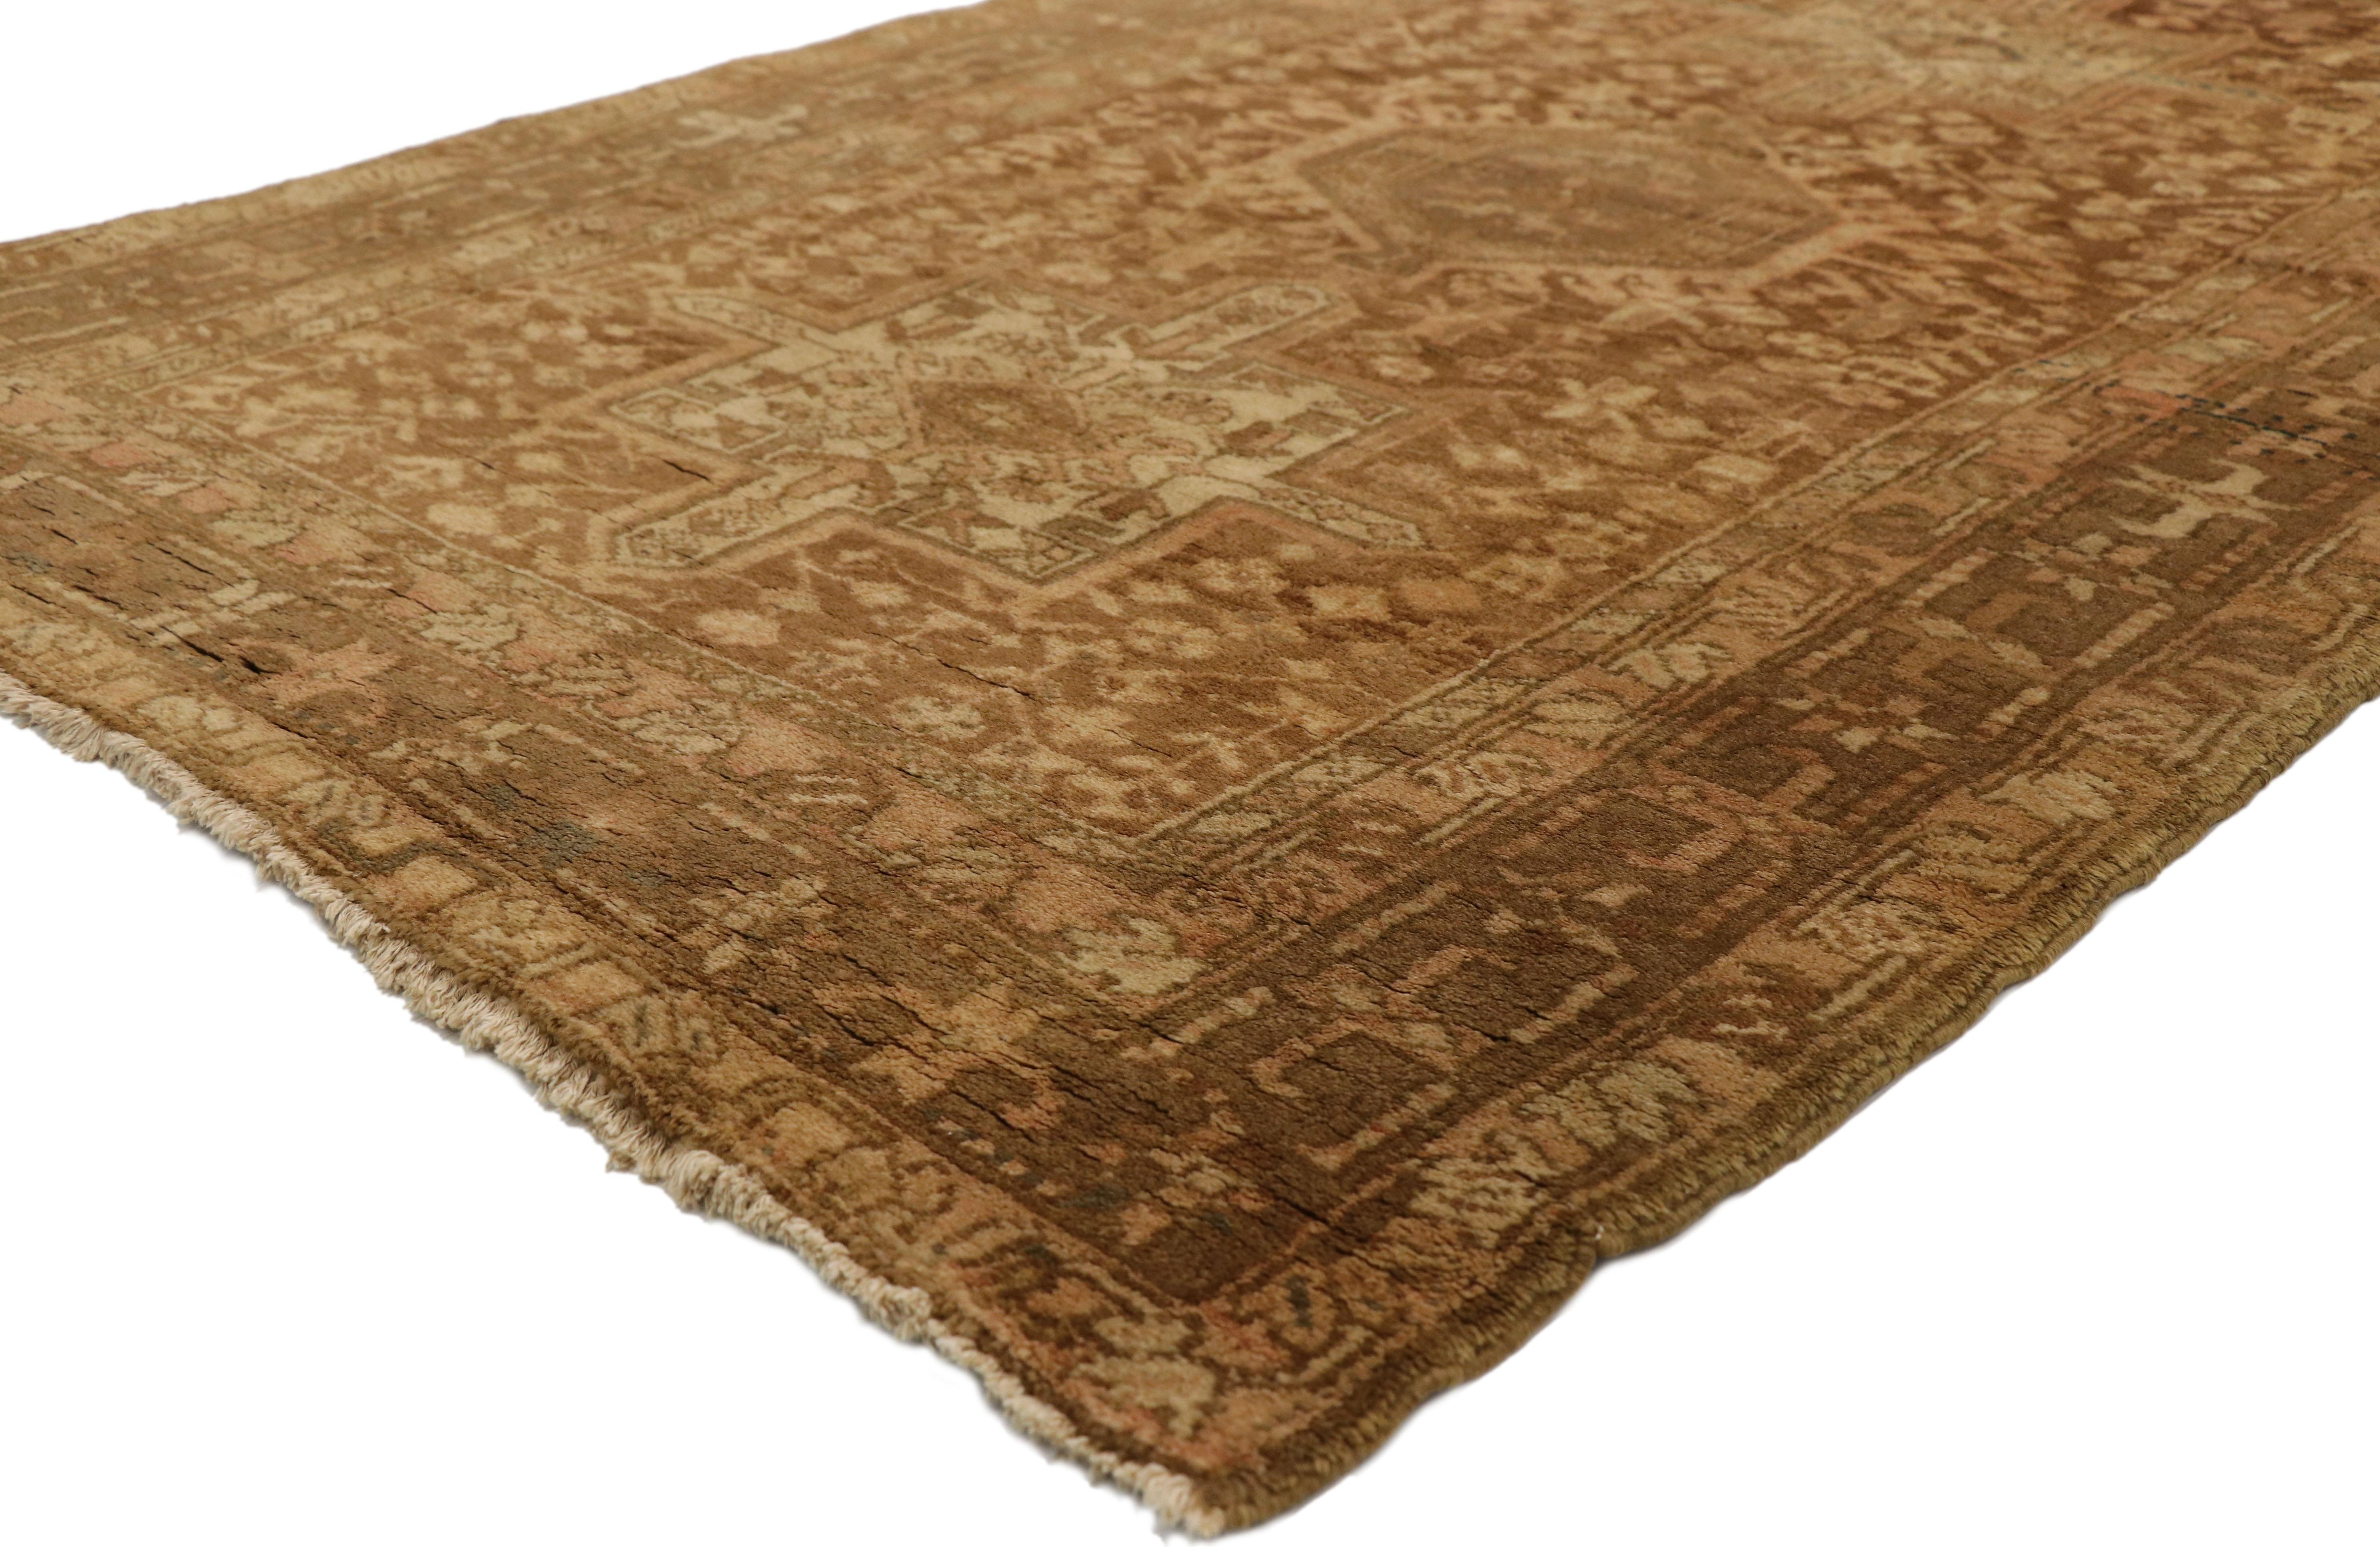 60241 Vintage Persian Heriz Karaja Runner with Bungalow Craftsman Style. With a warm, neutral color palette and striking architectural design elements, this hand knotted wool vintage Persian Heriz Karaja runner beautifully blends contemporary and